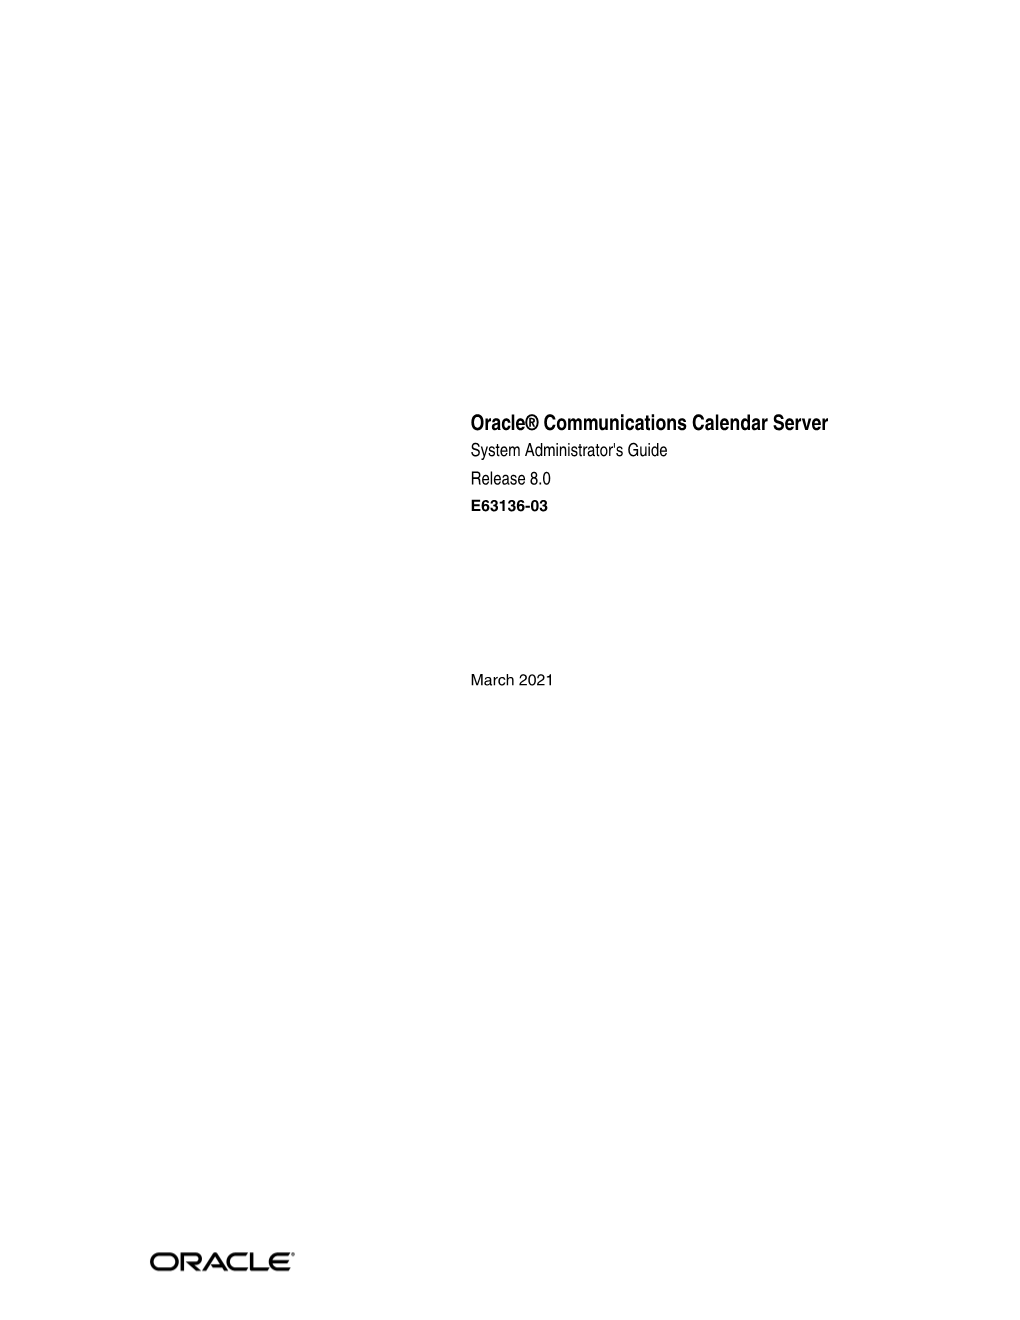 Oracle Communications Calendar Server System Administrator's Guide, Release 8.0 E63136-03